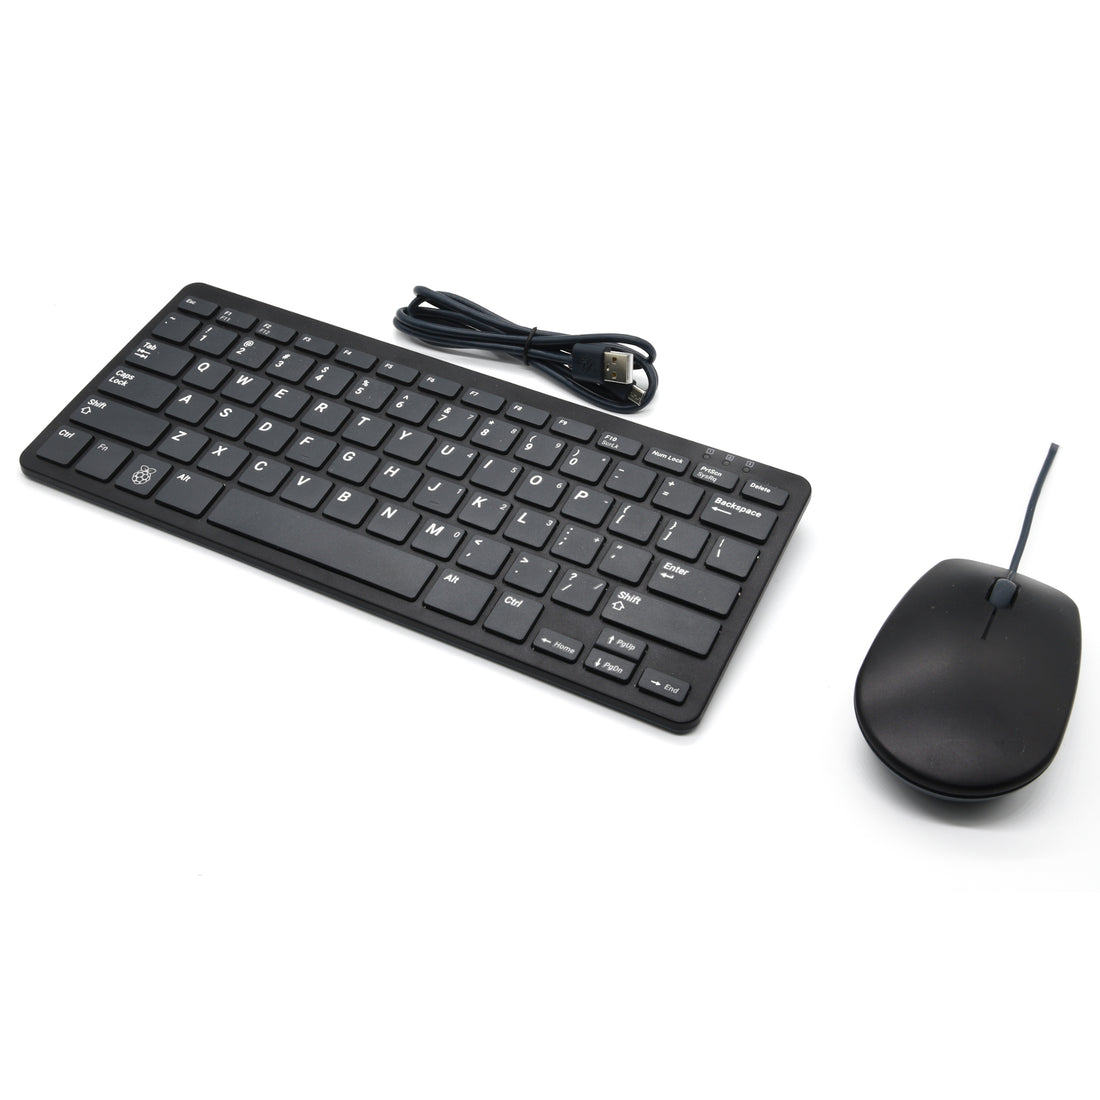 Raspberry Pi Official Keyboard and Mouse Value Pack (U.S. Version Black/Grey) by PepperTech Digital